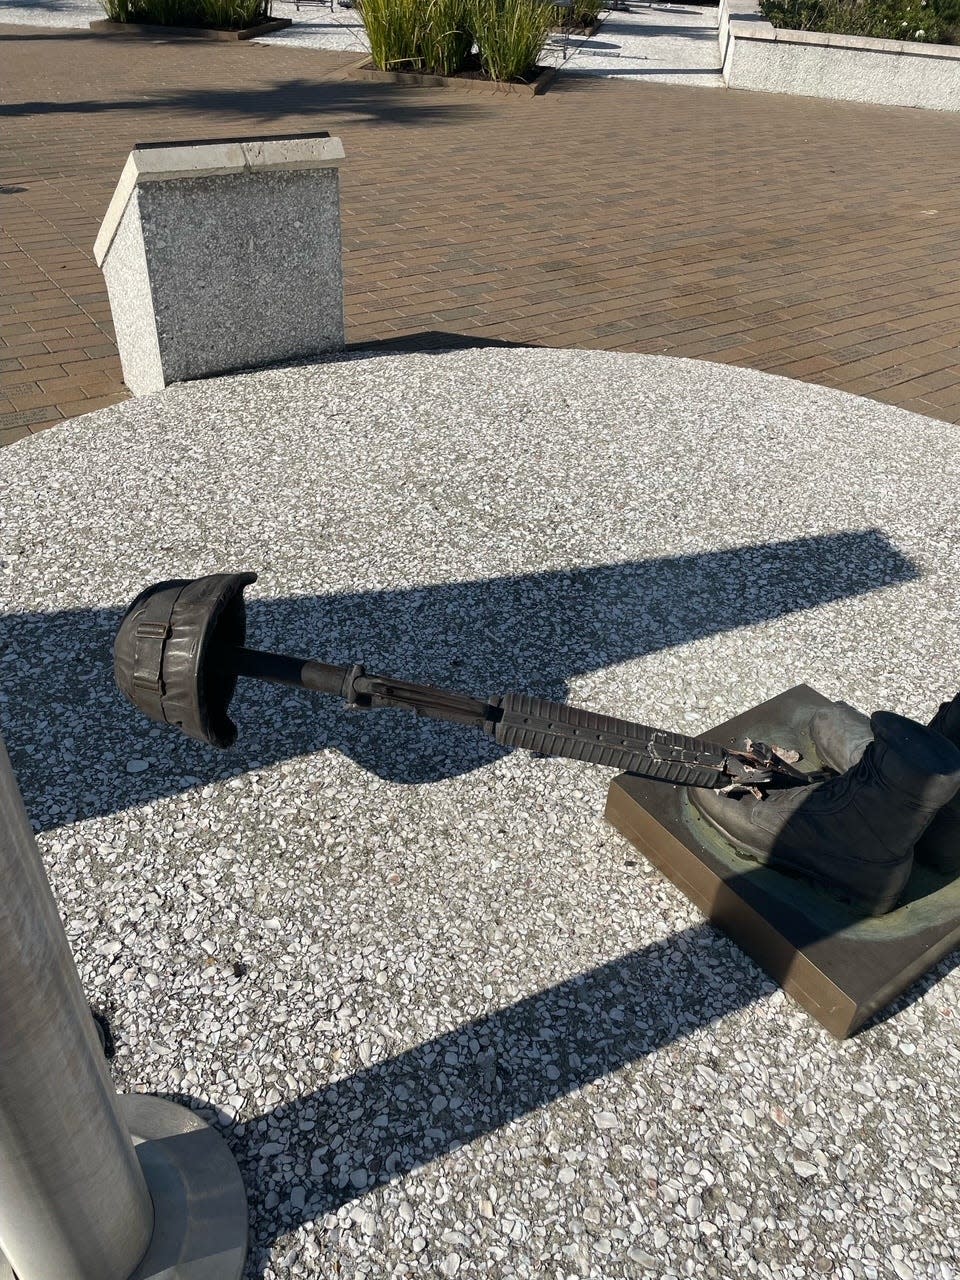 A 50-year-old woman is facing criminal charges after police in South Carolina say she destroyed and urinated on a Veterans Memorial statue in the city of Bluffton, a town in Beaufort County along the state's eastern coast near Brighton Beach.